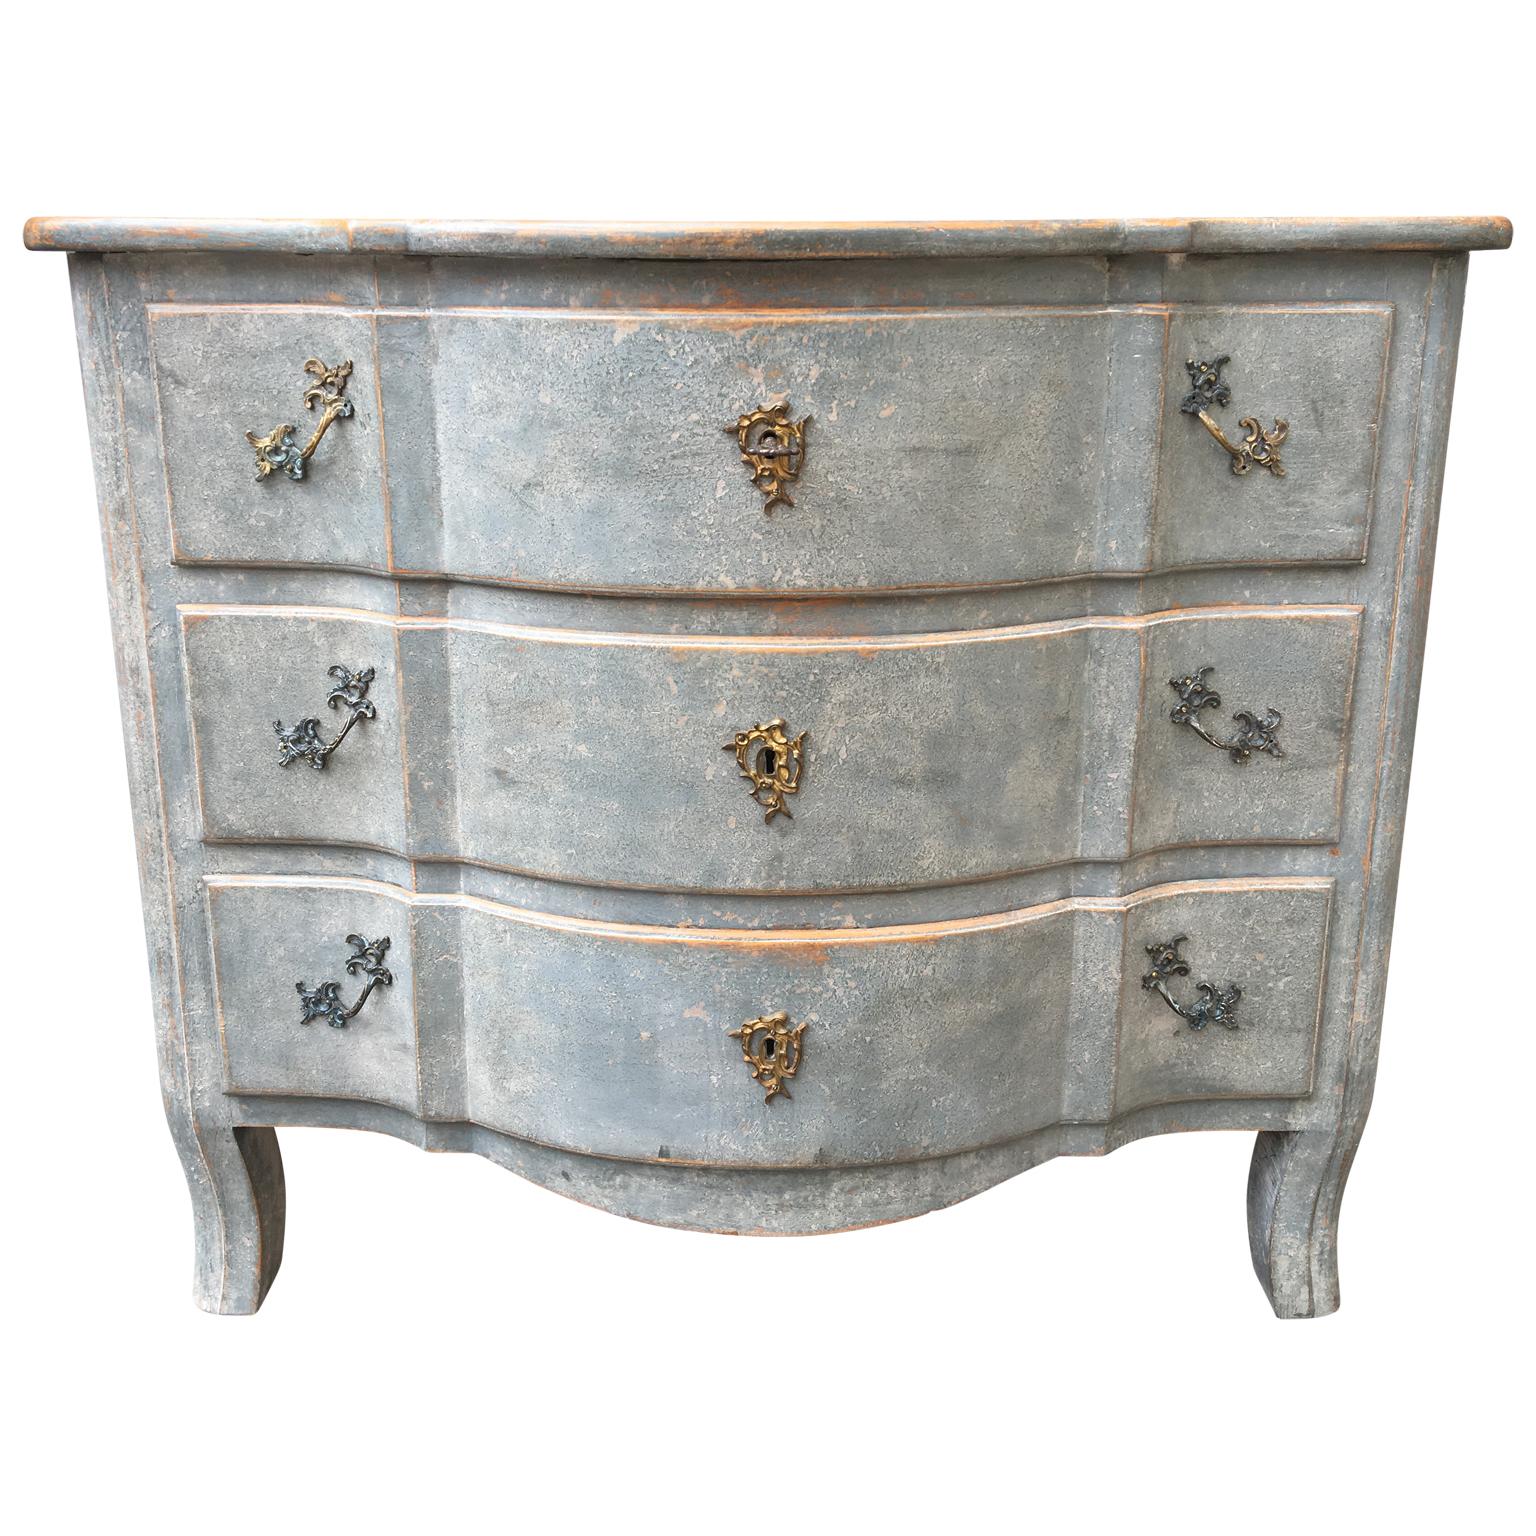 Swedish blue painted 19th century chest of drawers

Swedish blue painted 19th century chest with 3 drawers and original brass hardware. 
Key included, lock in good working condition.

Please note that this chest of drawers is located in Halmstad